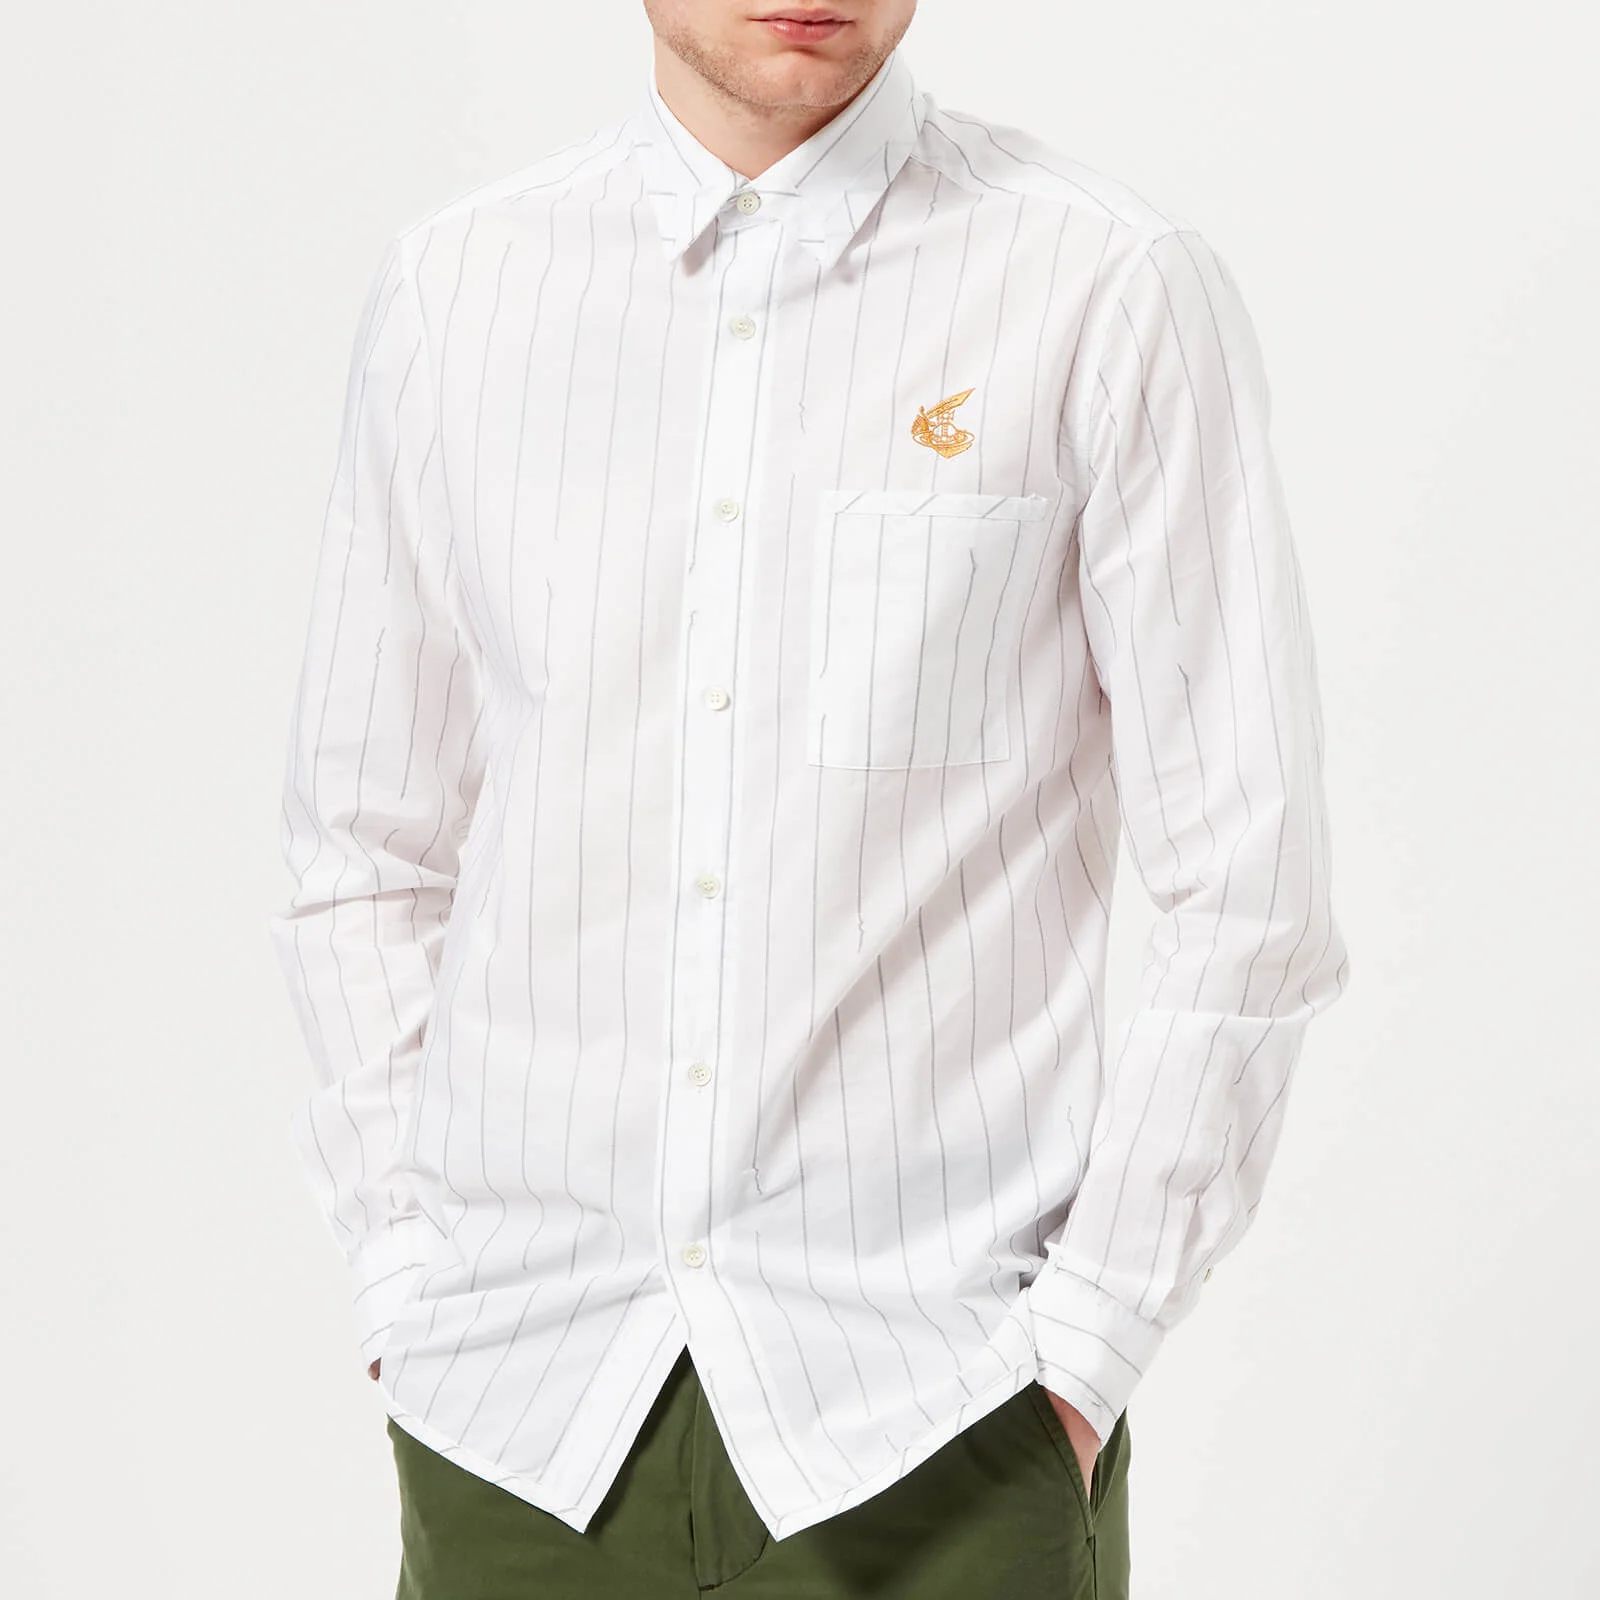 Vivienne Westwood Anglomania Men's Classic Shirt - White Image 1